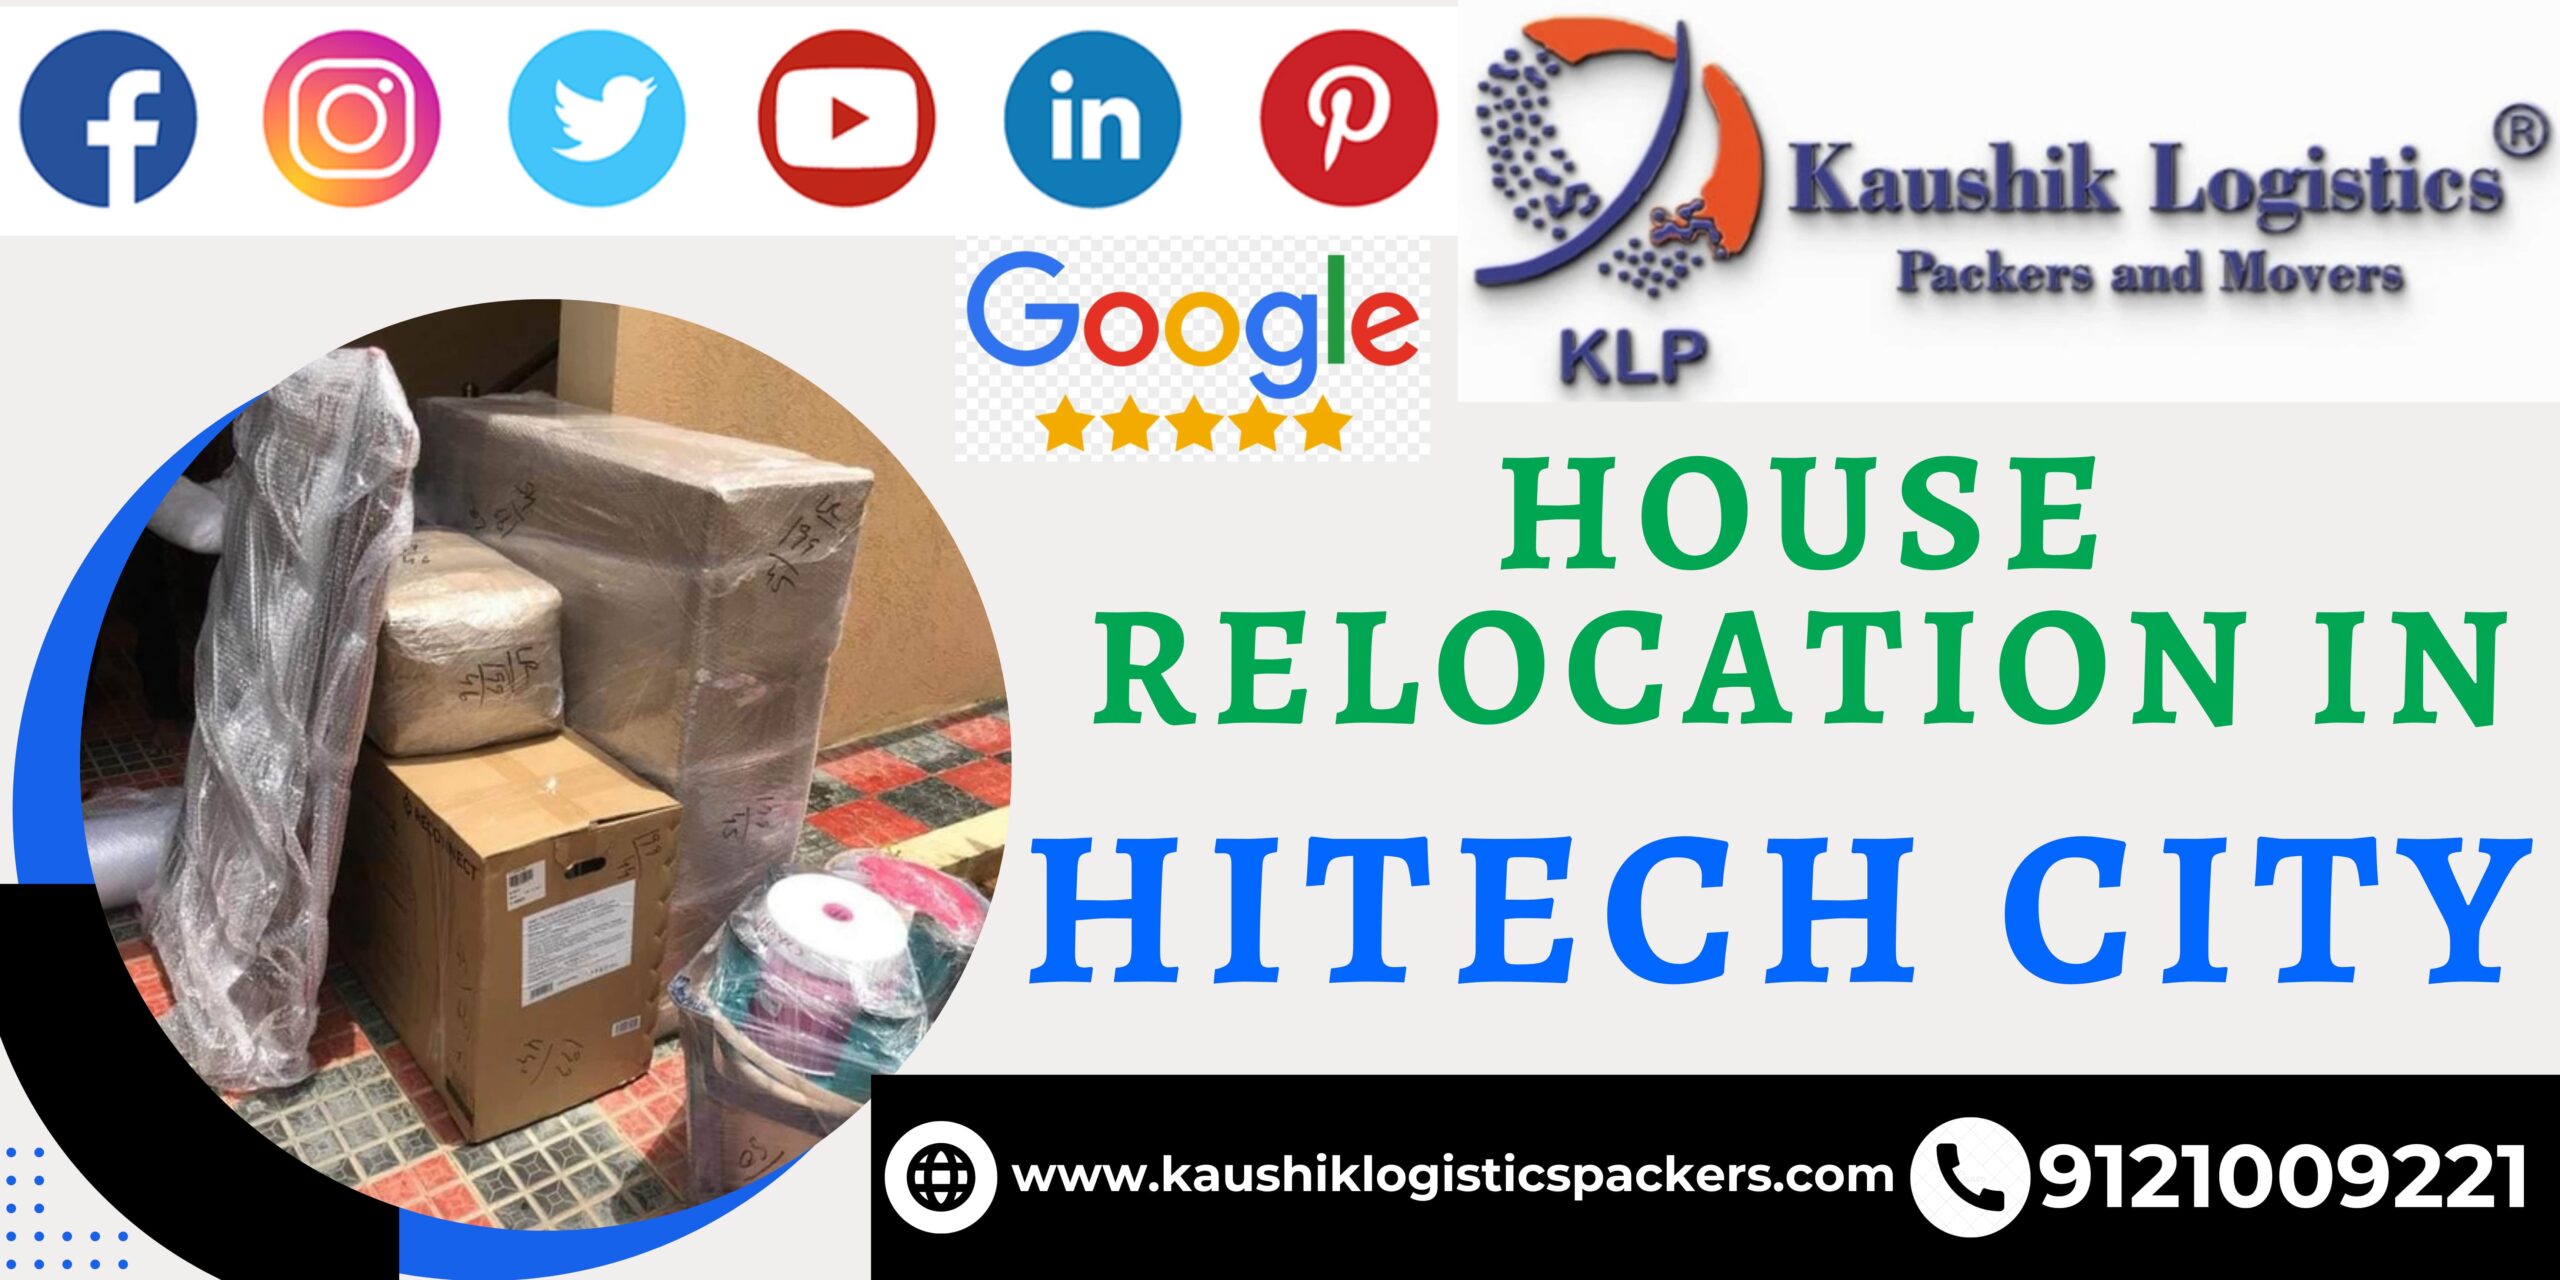 Packers and Movers In Hitech City